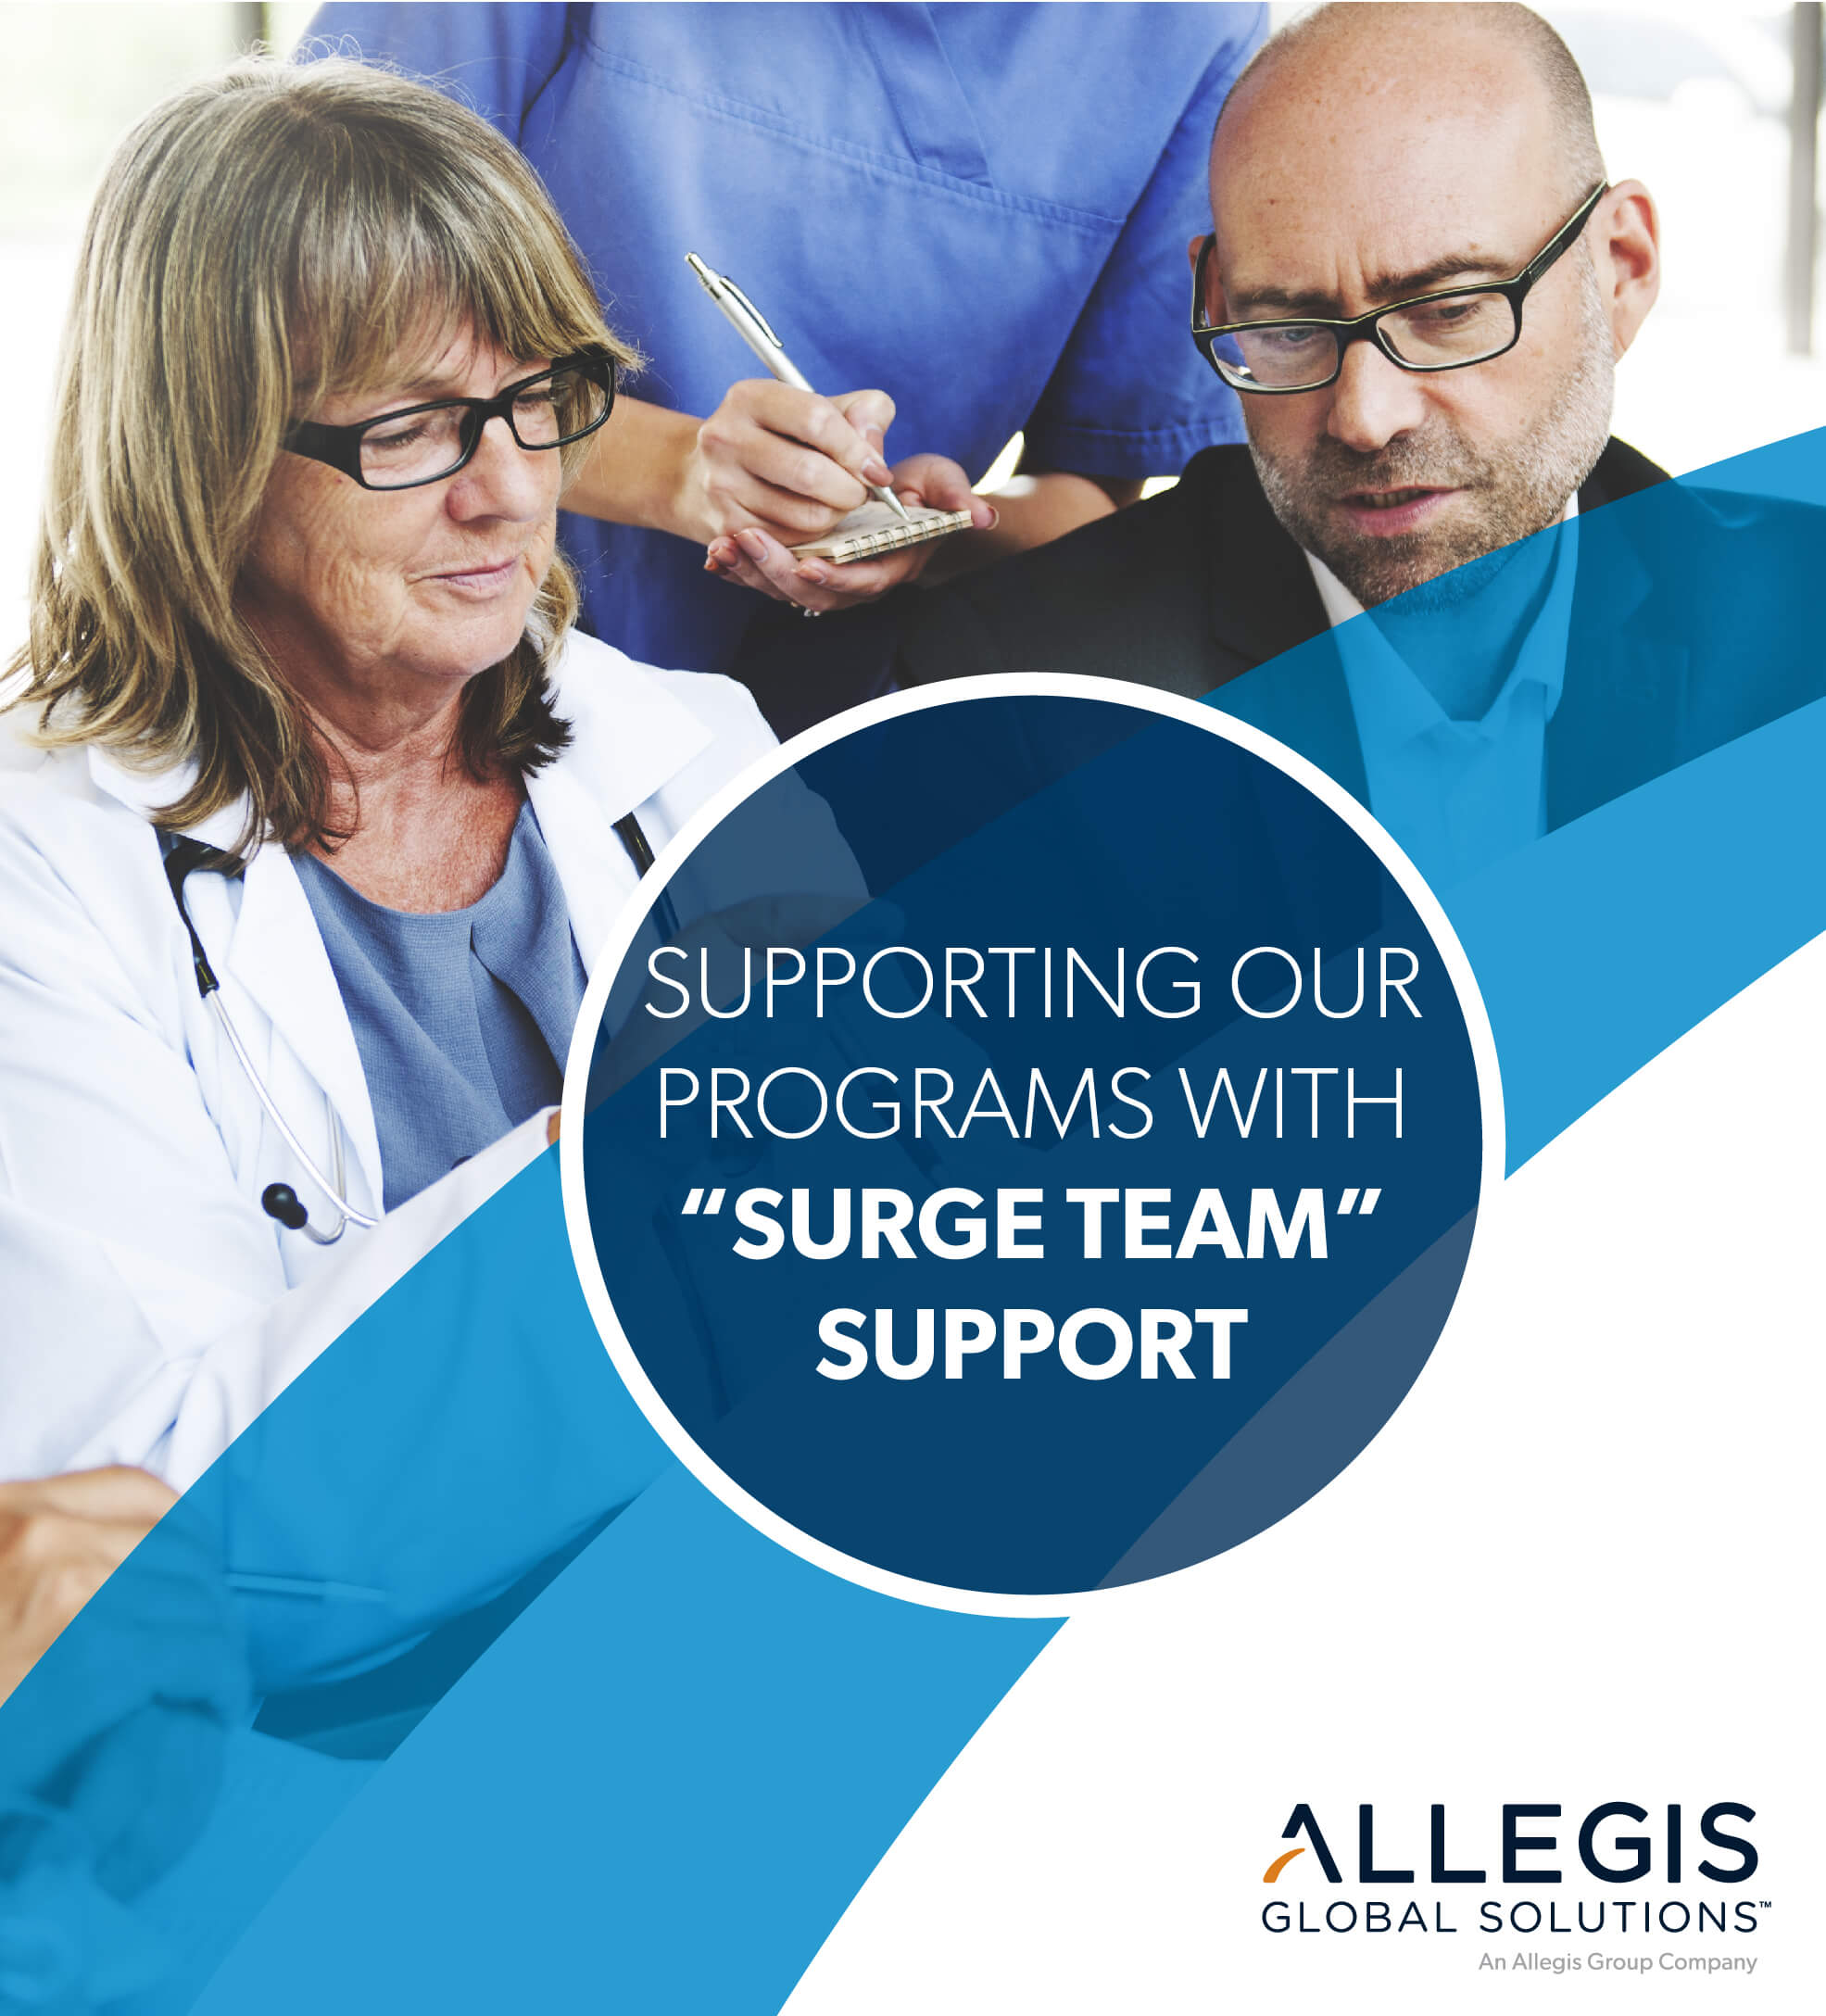 Supporting Our Programs With Surge Team Support